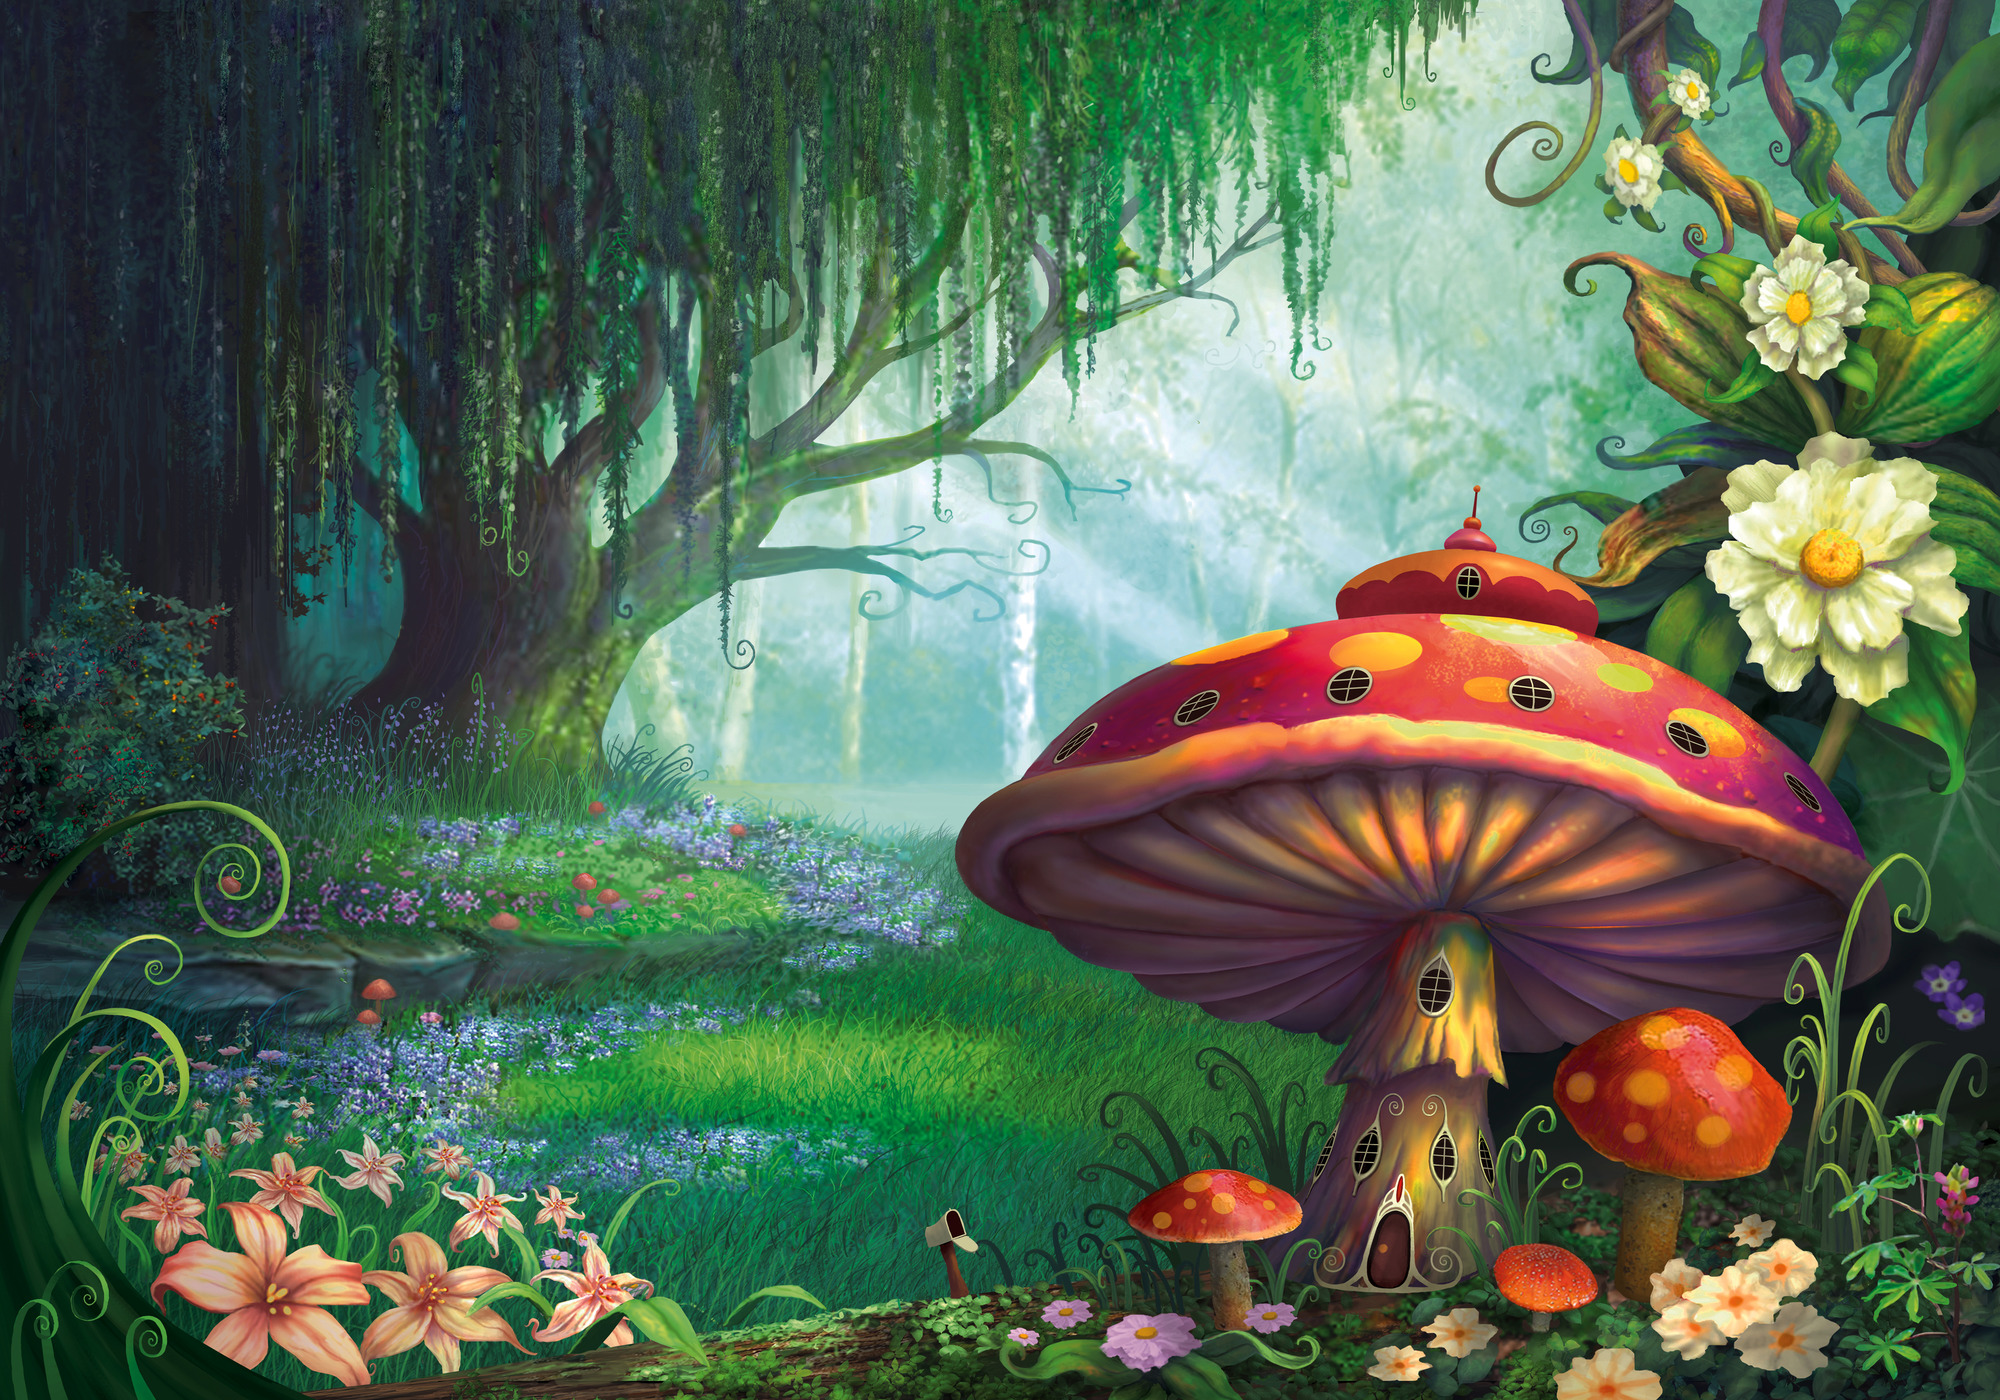 Miniature Mushroom House in Enchanted Forest HD Wallpaper